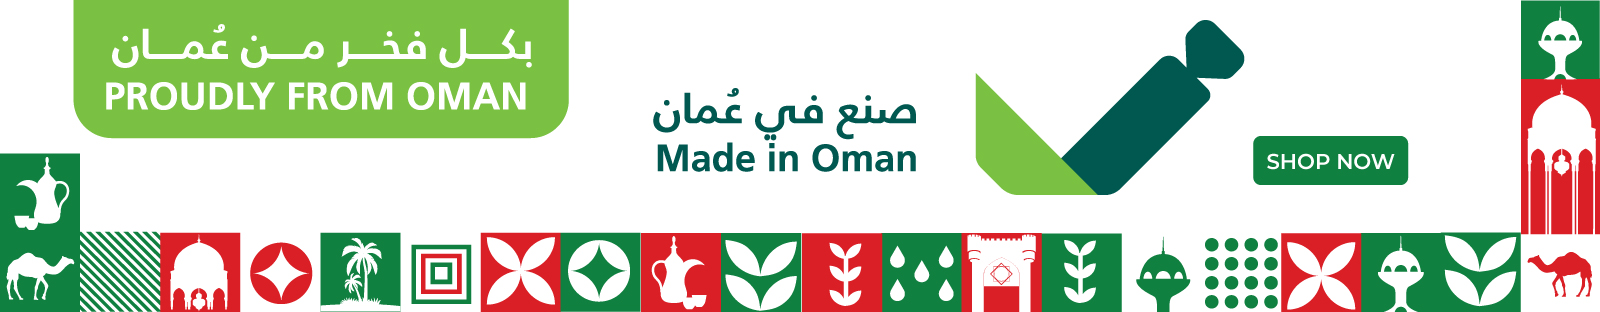 Made in   Oman  